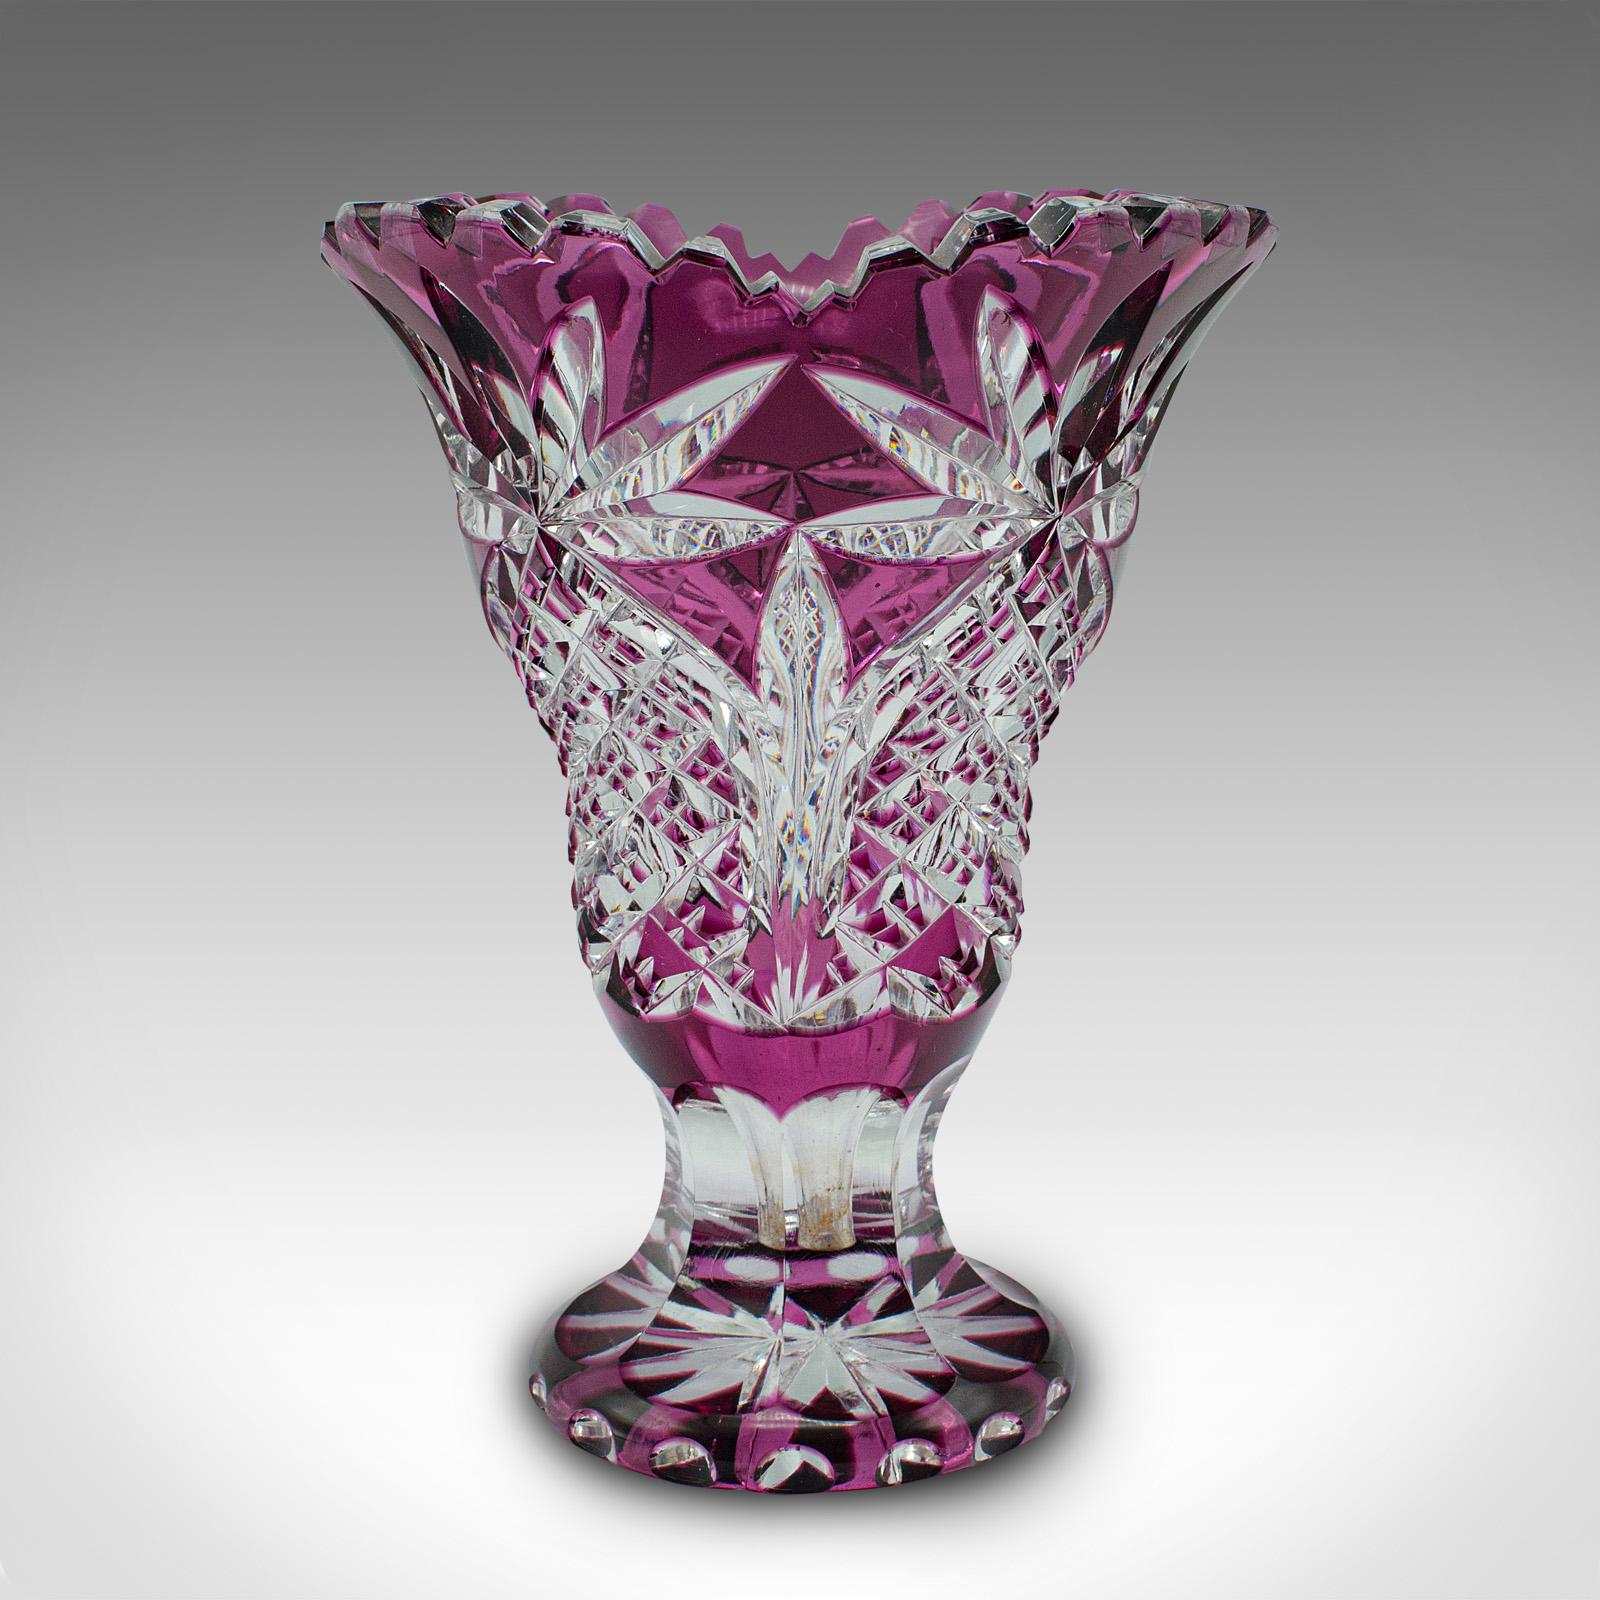 
This is an antique decorative vase. An English, cut glass flower vase, dating to the late Victorian period, circa 1880.

Of great colour and accentuated with delightful decor
Displays a desirable aged patina and in good order
Quality cut glass